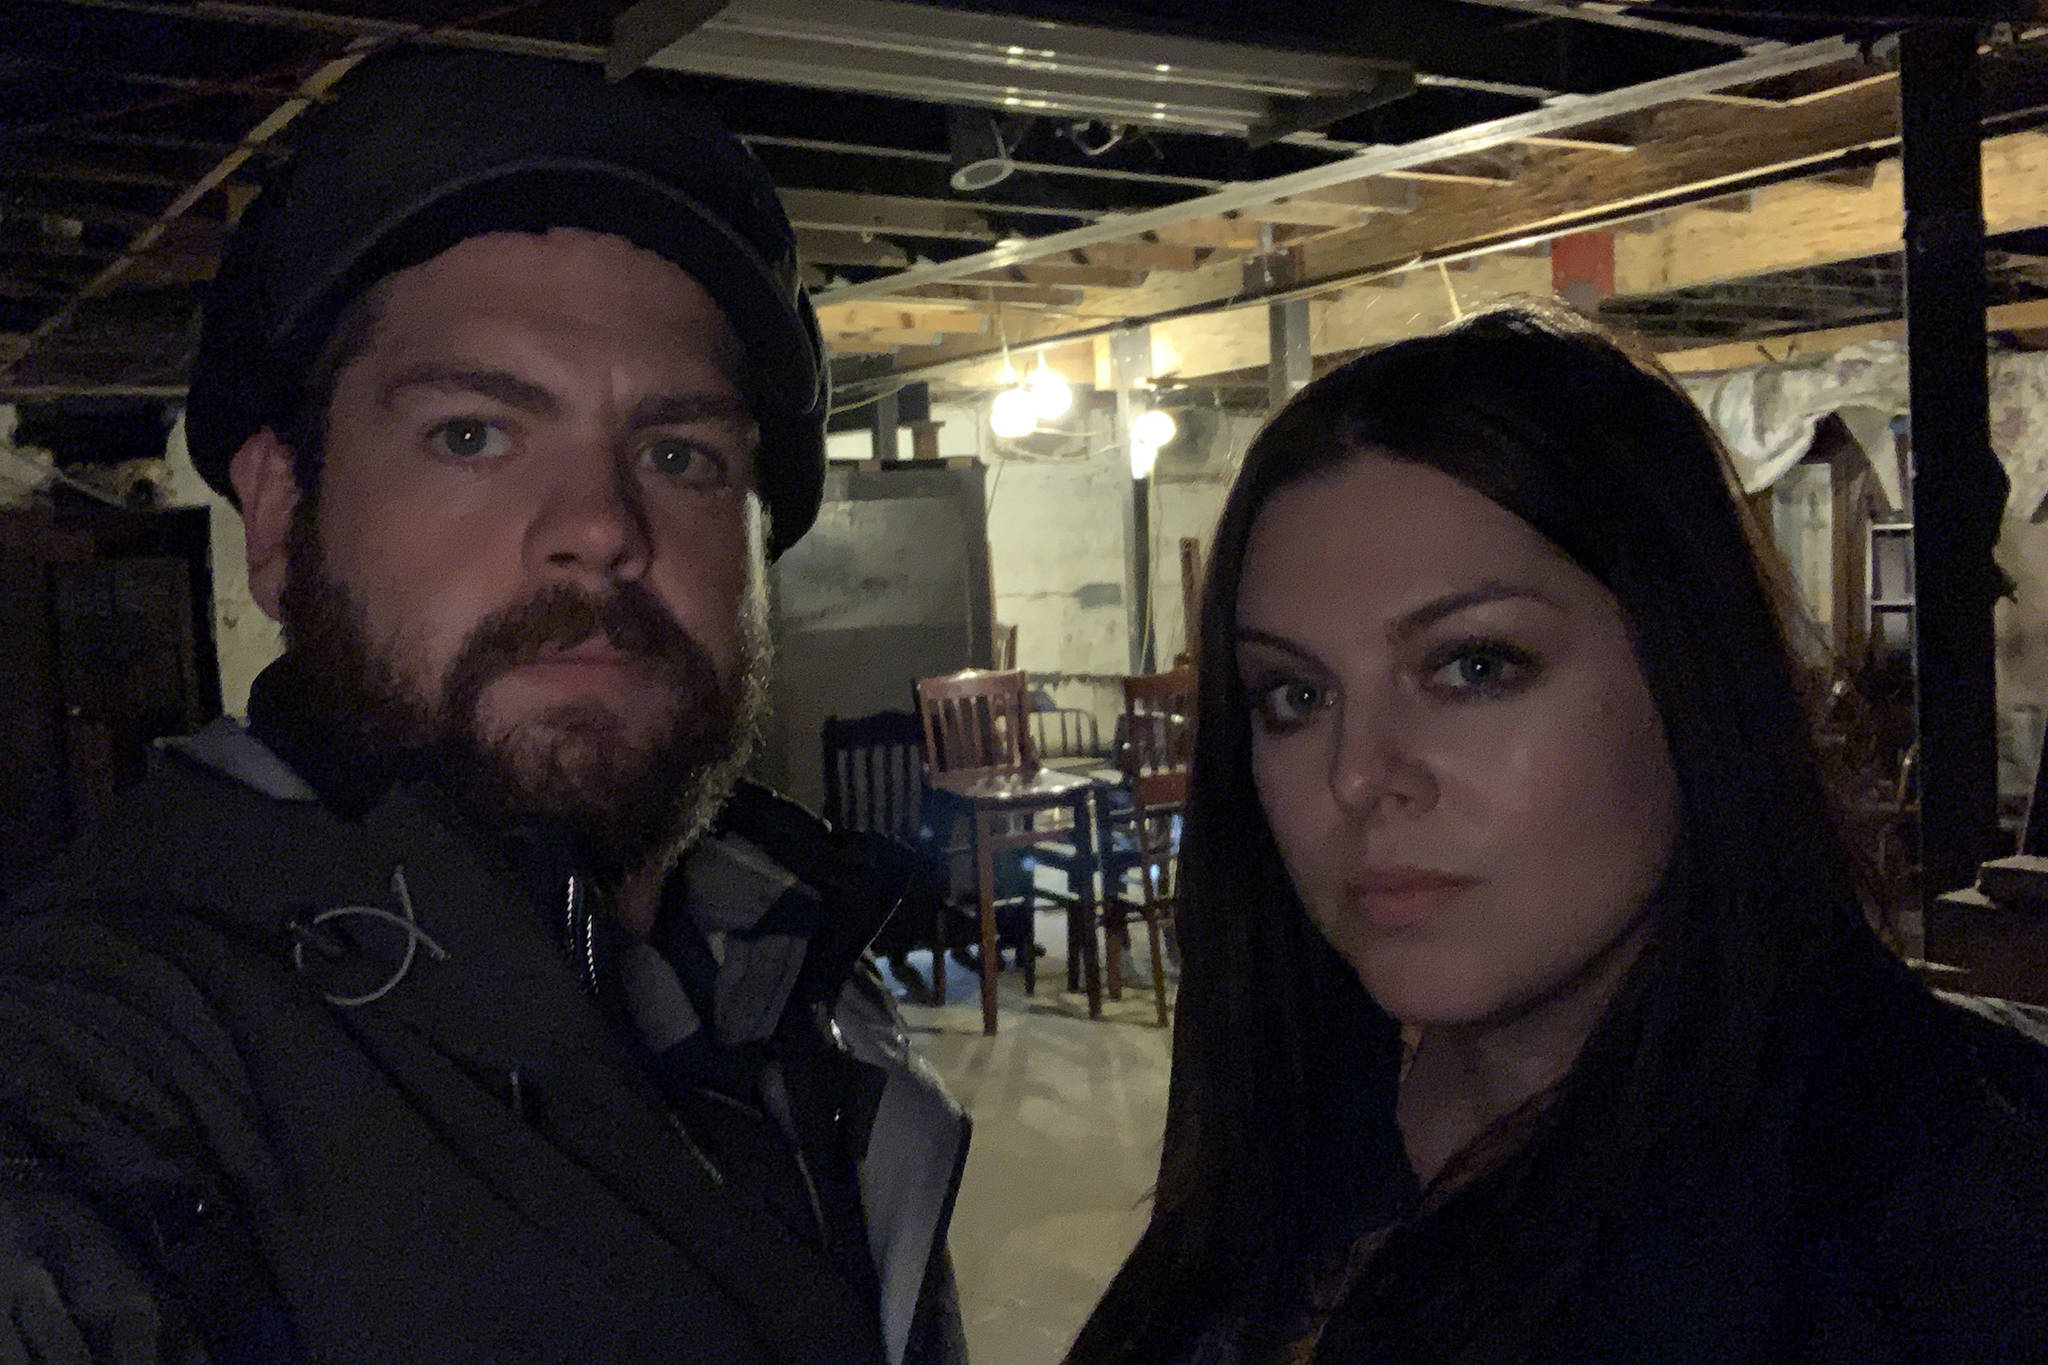 Jack Osbourne and Katrina Weidman prepare to investigate the basement of the Alaskan Hotel, which will be shown in an episode of the TV show “Portals to Hell.” (Courtesy Photo | Travel Channel)